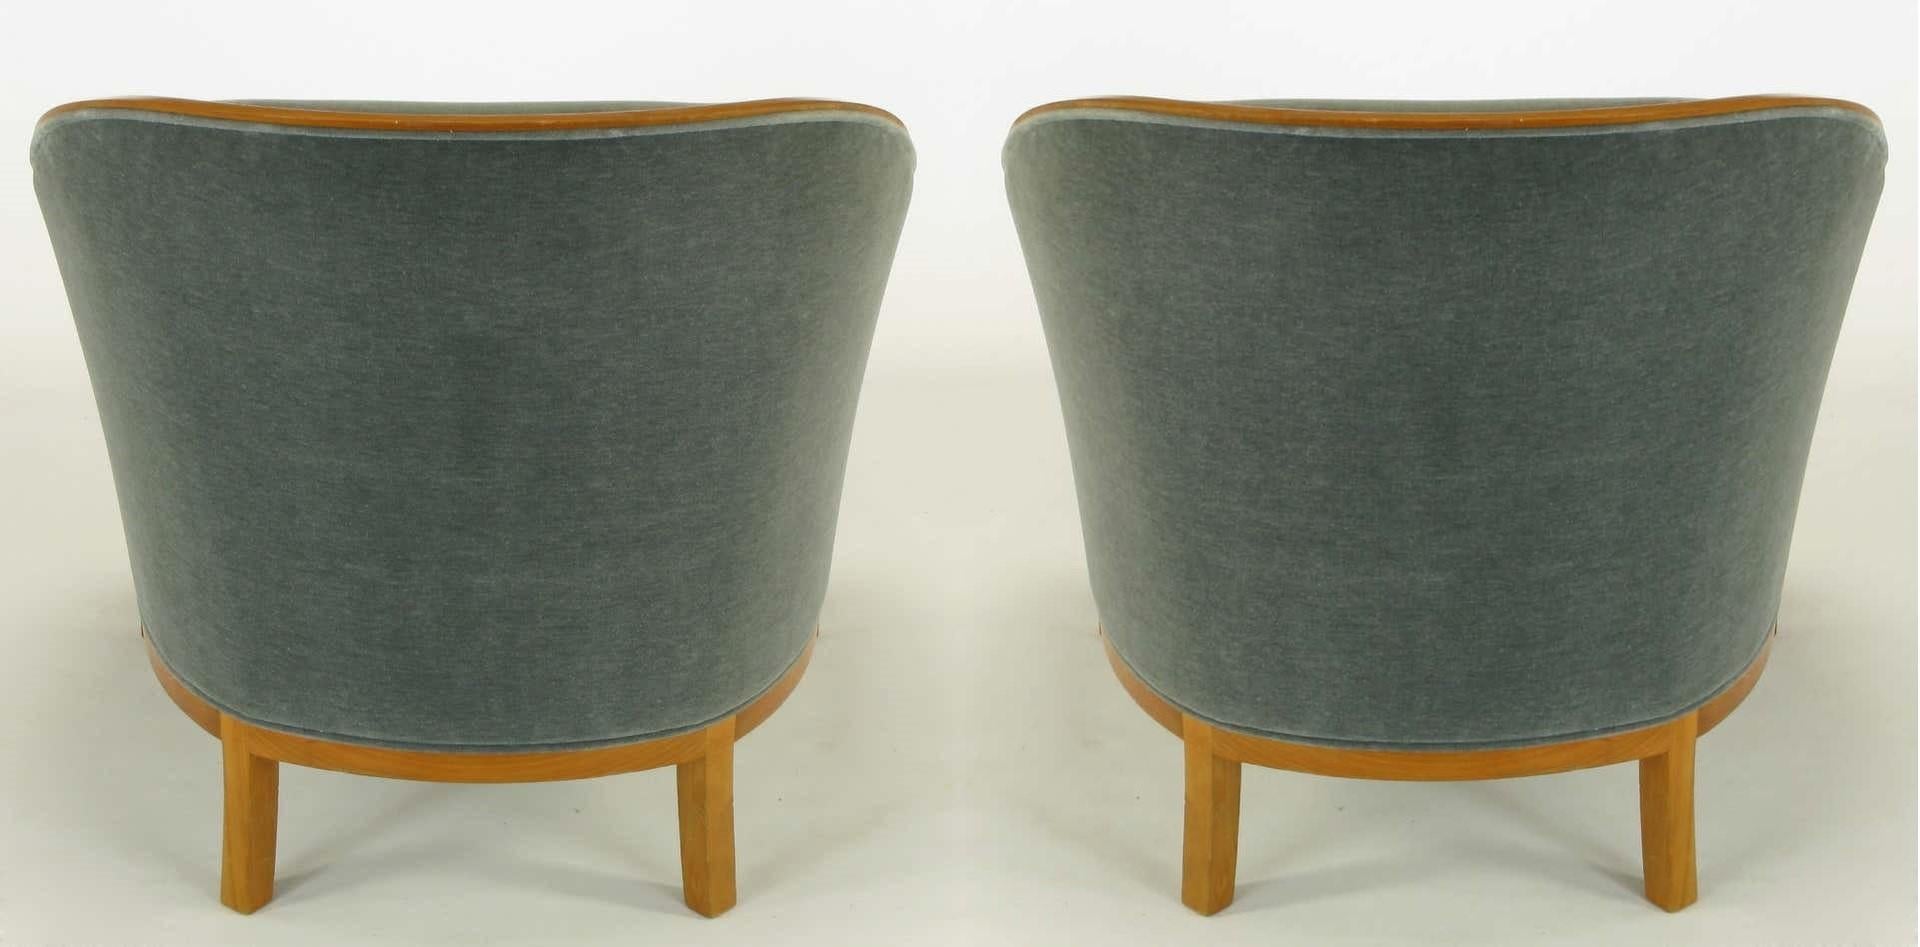 American Pair of Midcentury Bankers Lounge Chairs by Ward Bennett